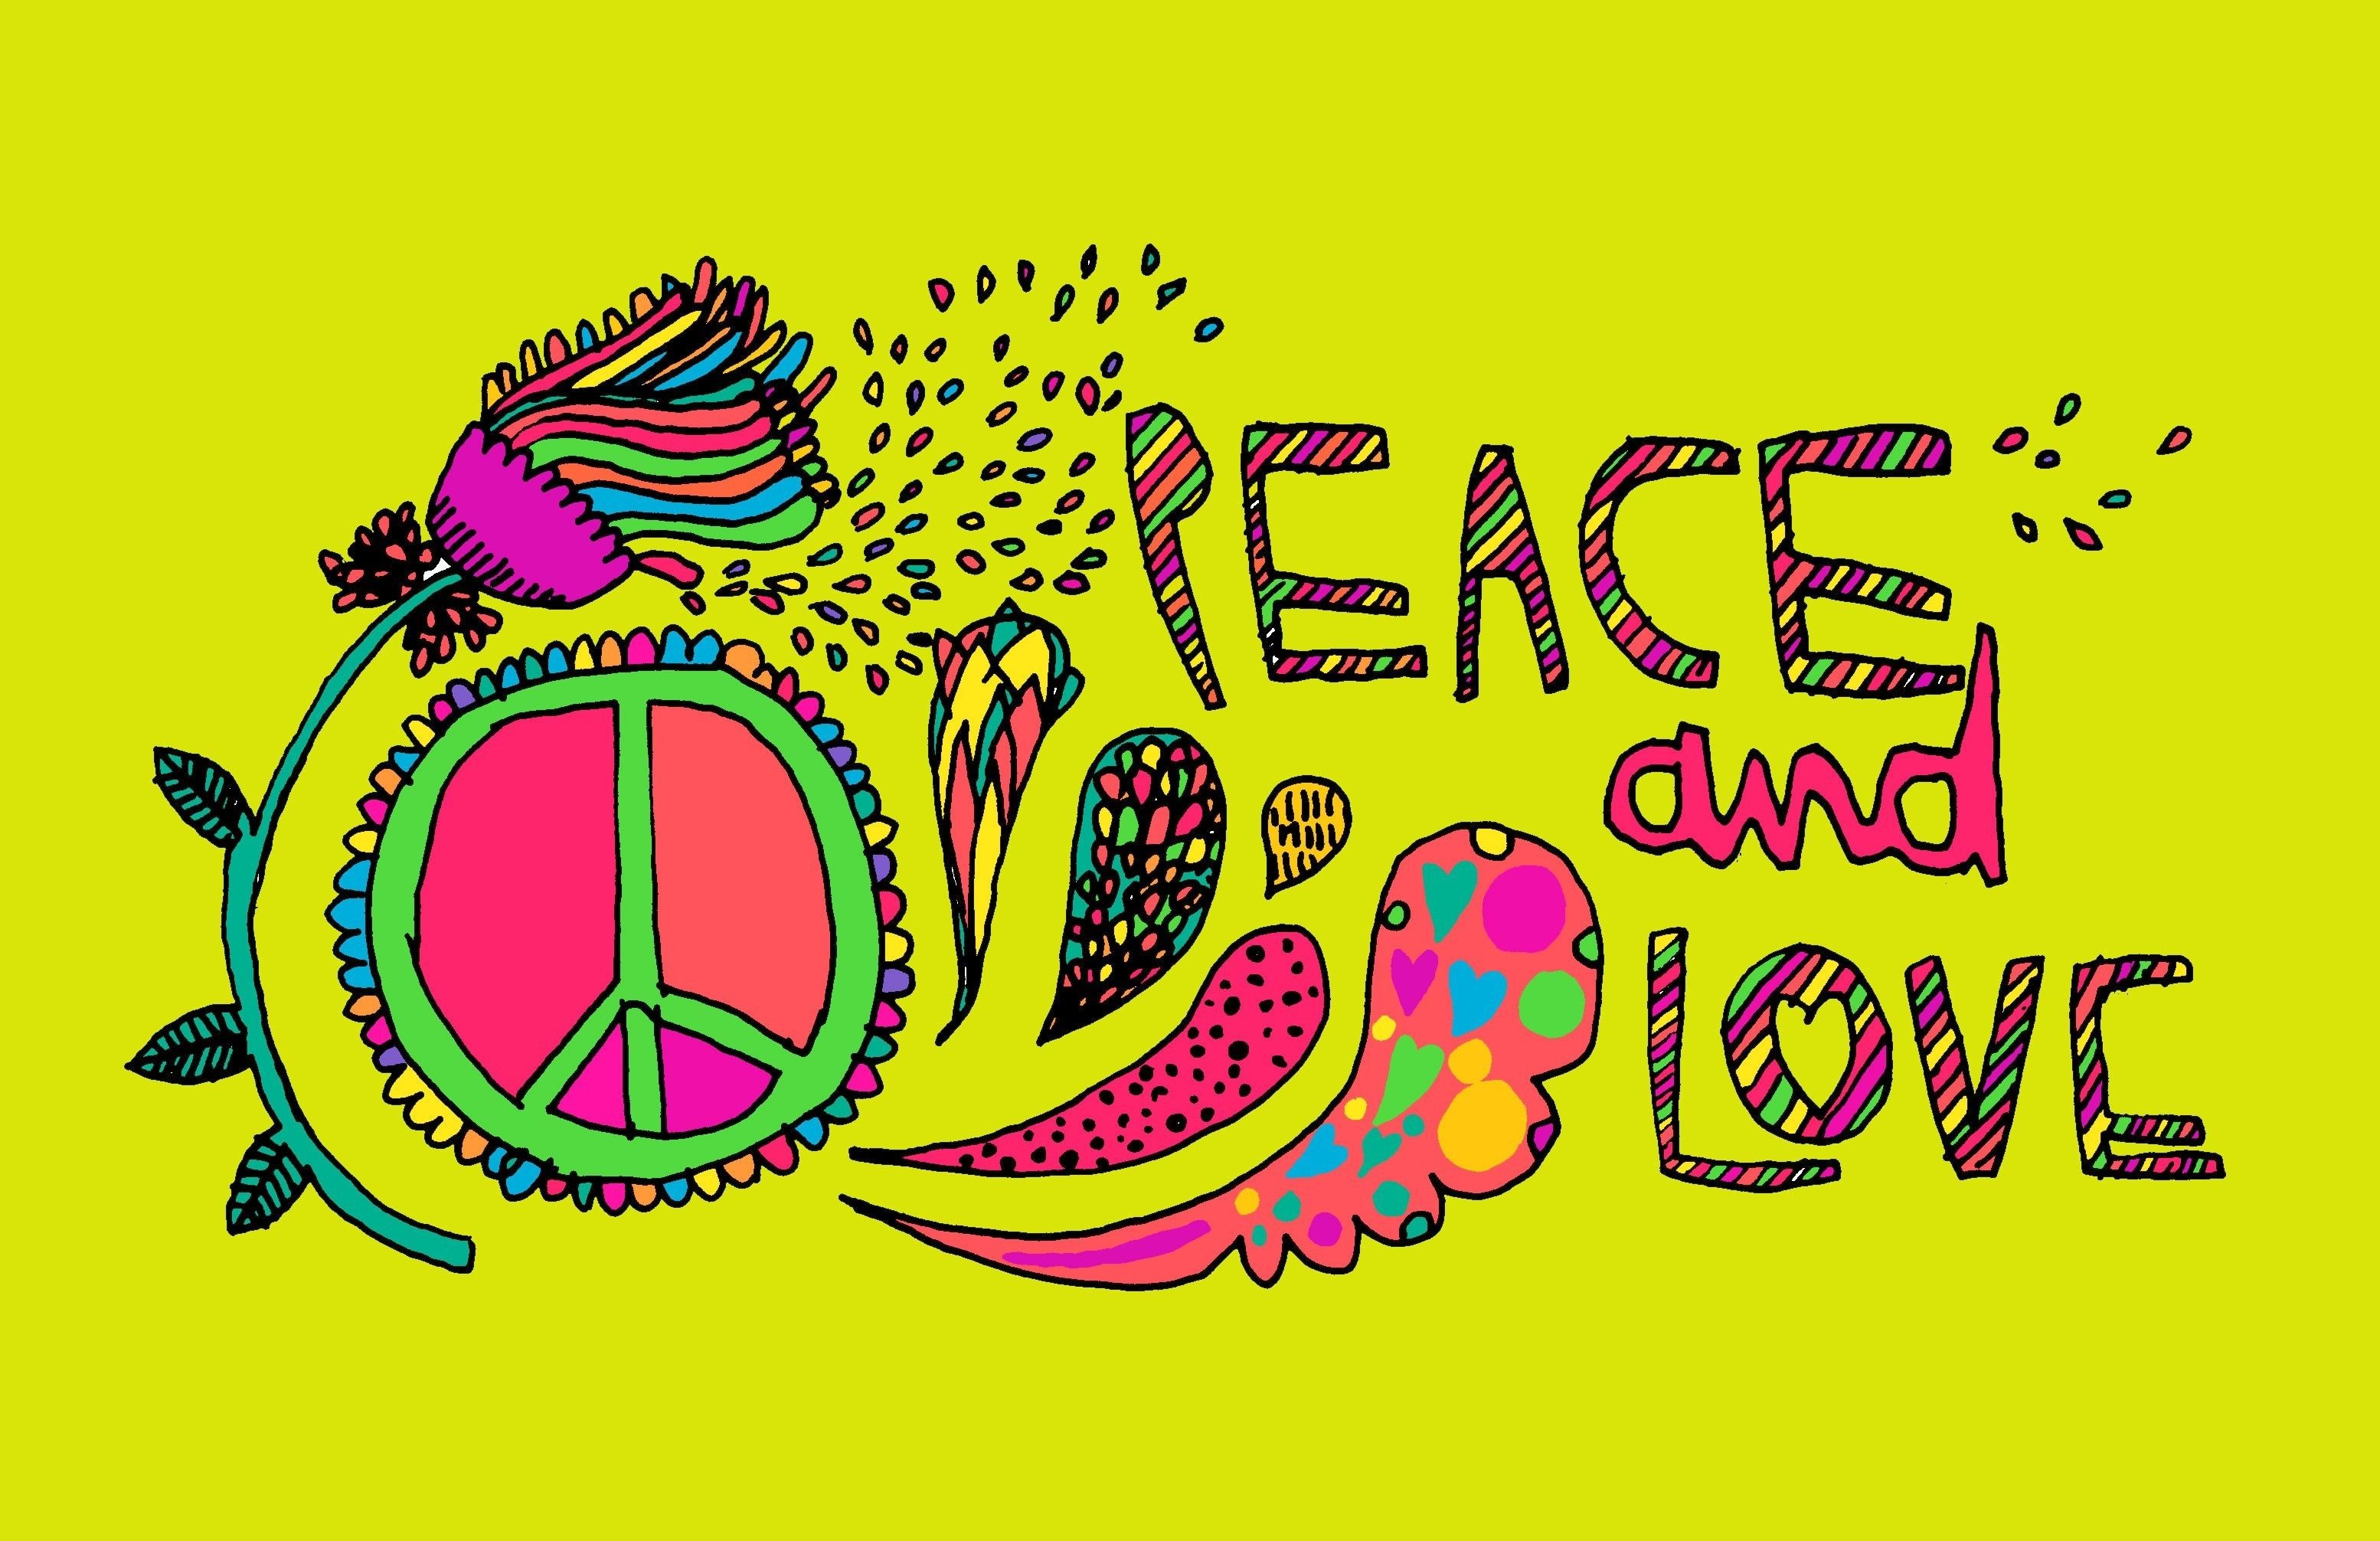 3108x2012 Hippie peace wallpapers top free hippie peace backgrounds jpg  Peace  love backgrounds